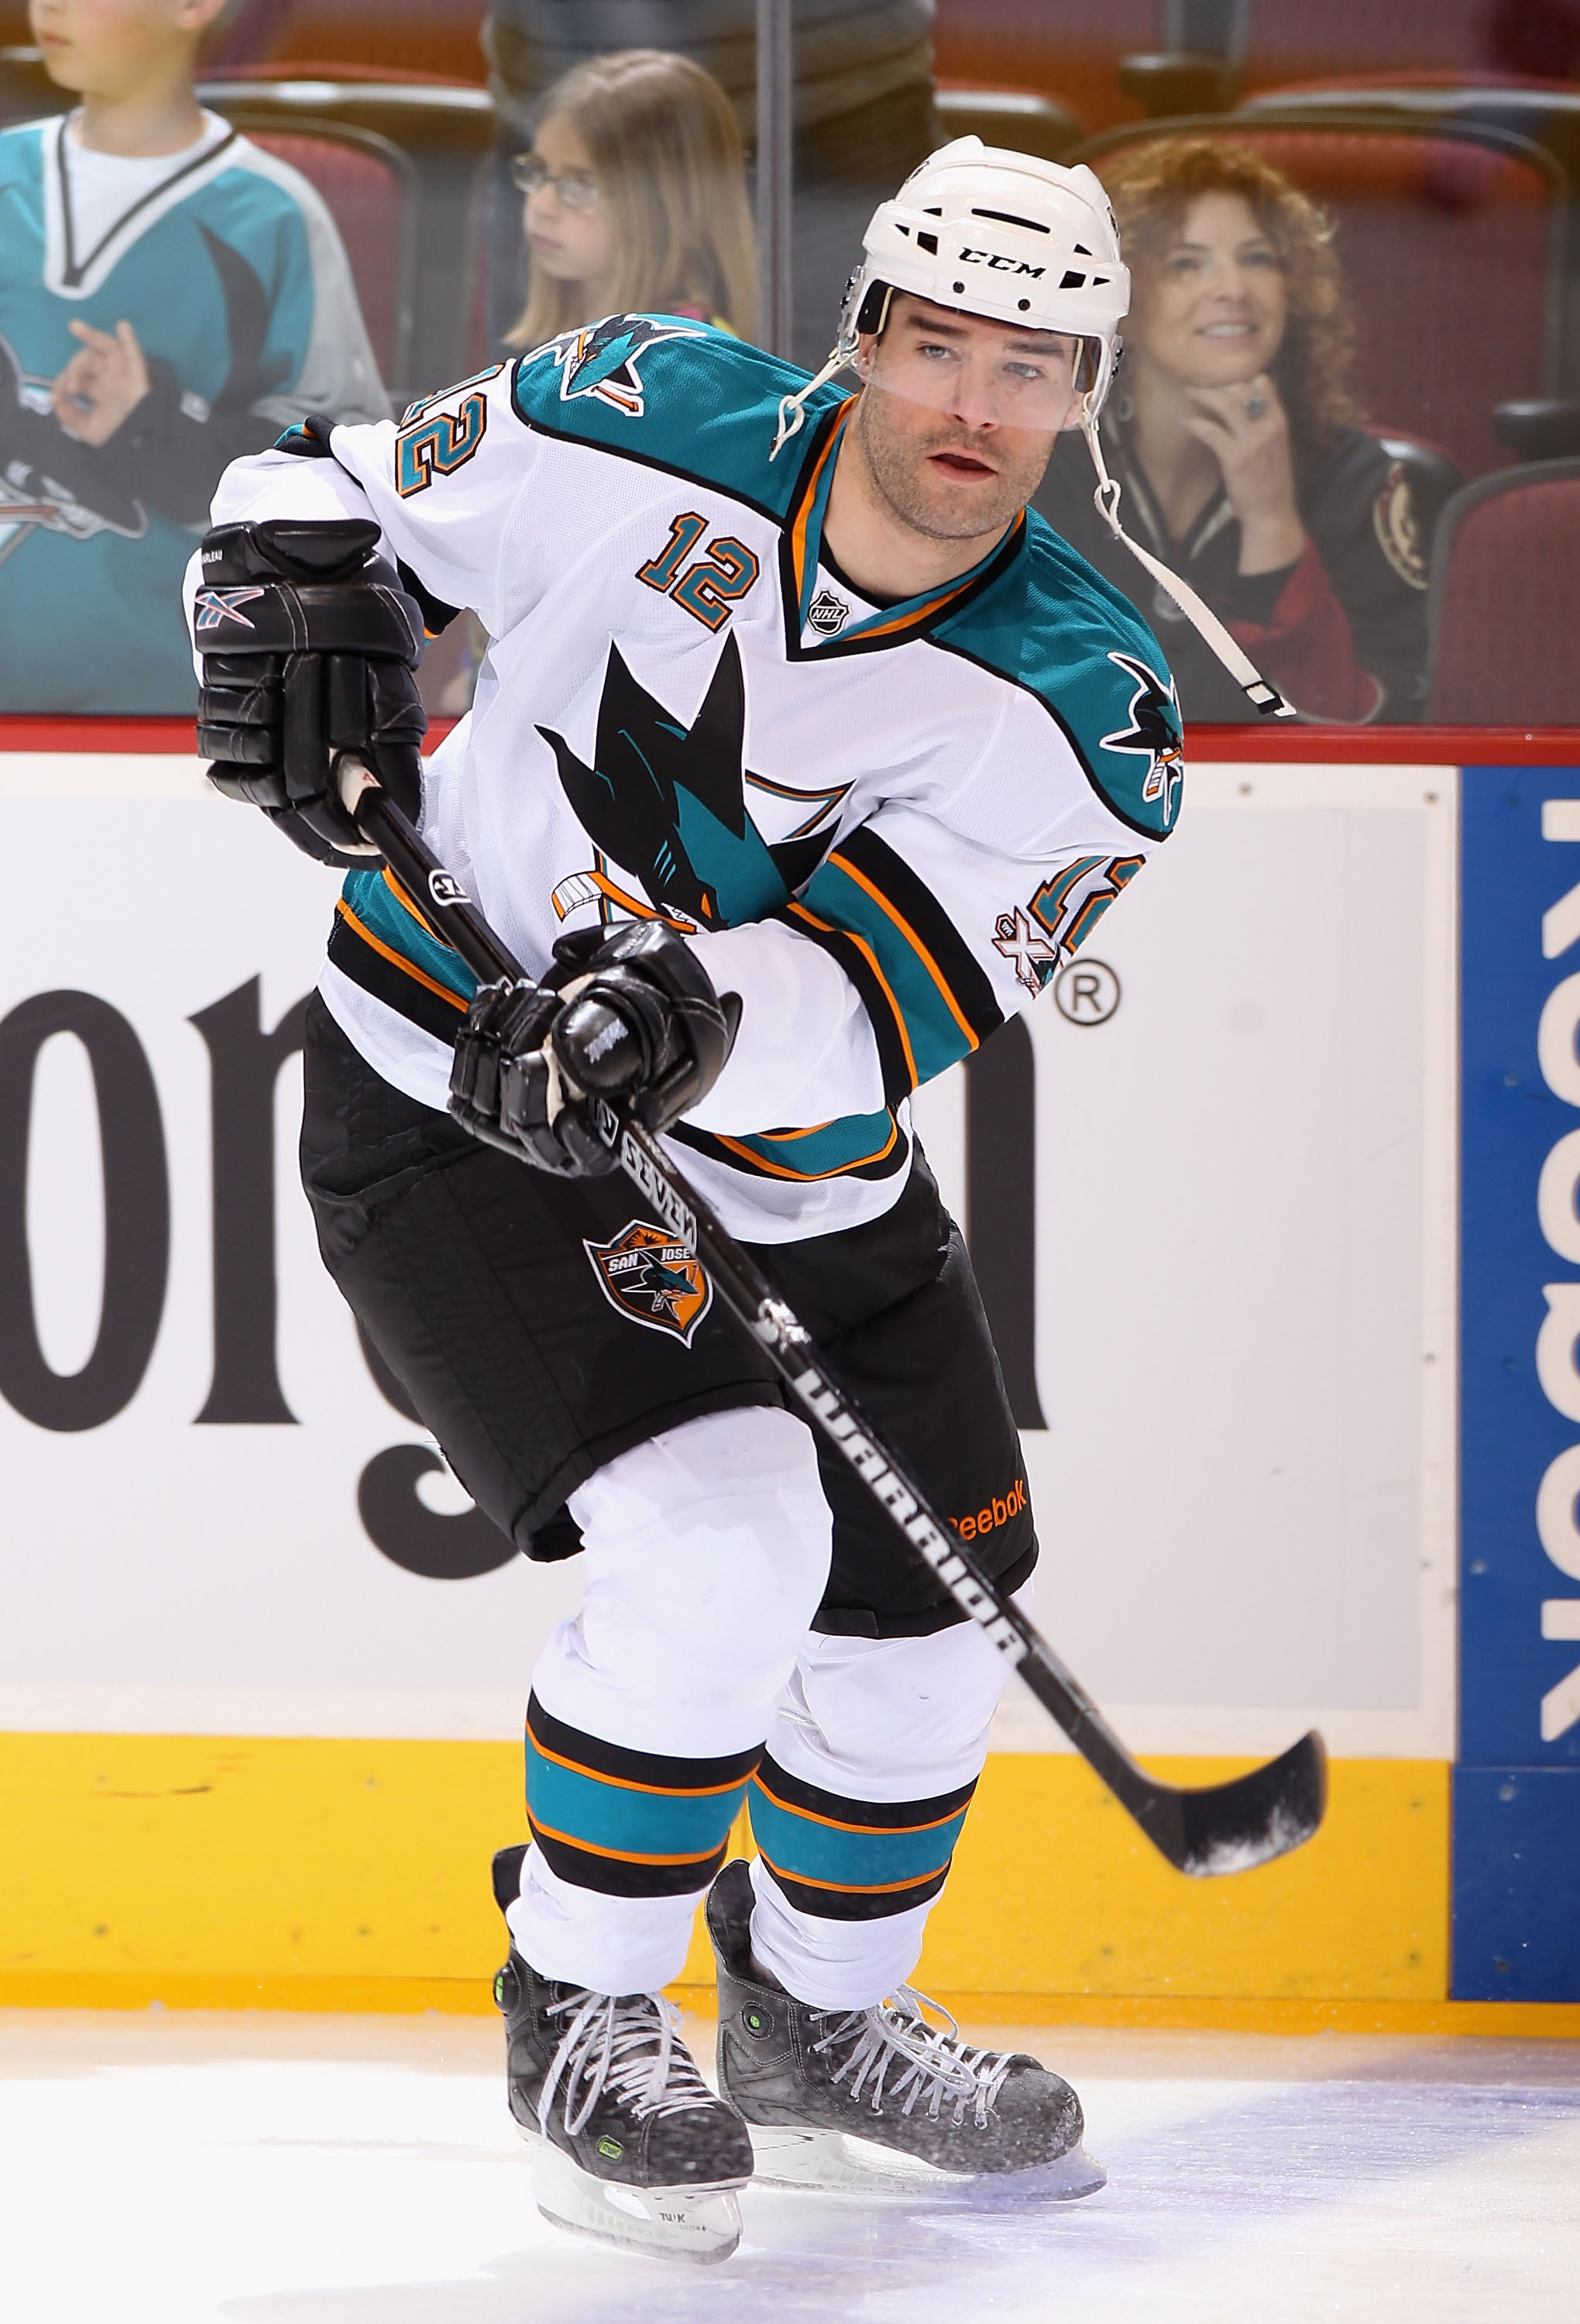 Thornton's memorable Sharks moments jersey